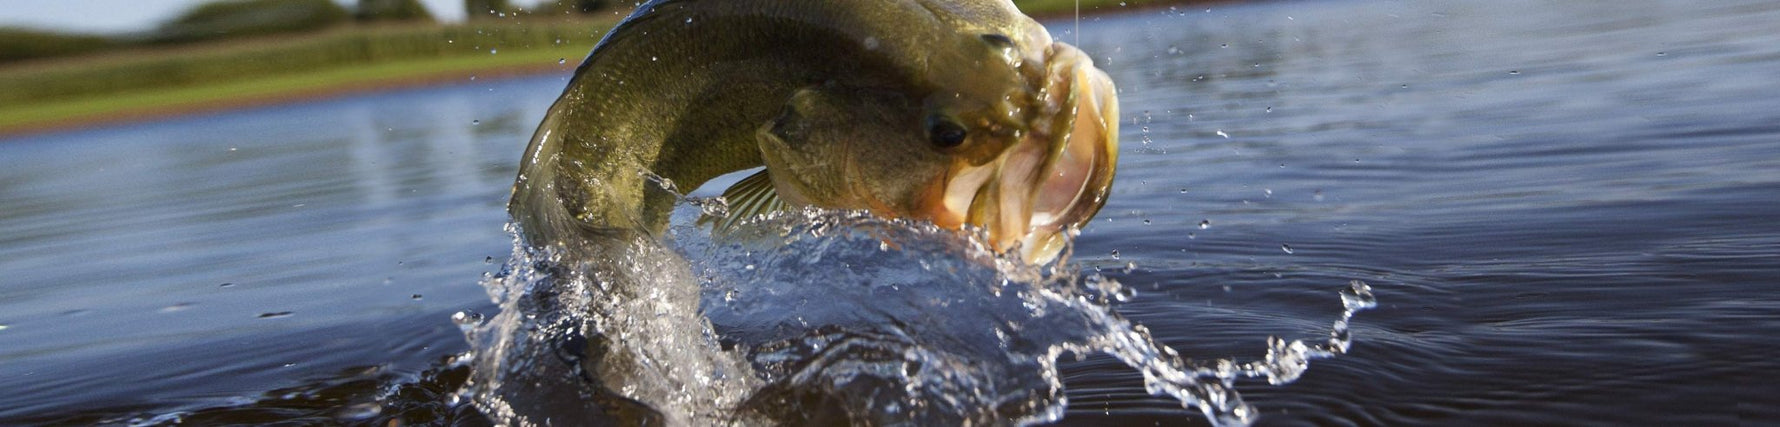 Pond Bass Fishing: Everything You Need to Know - Obee Fishing Co.